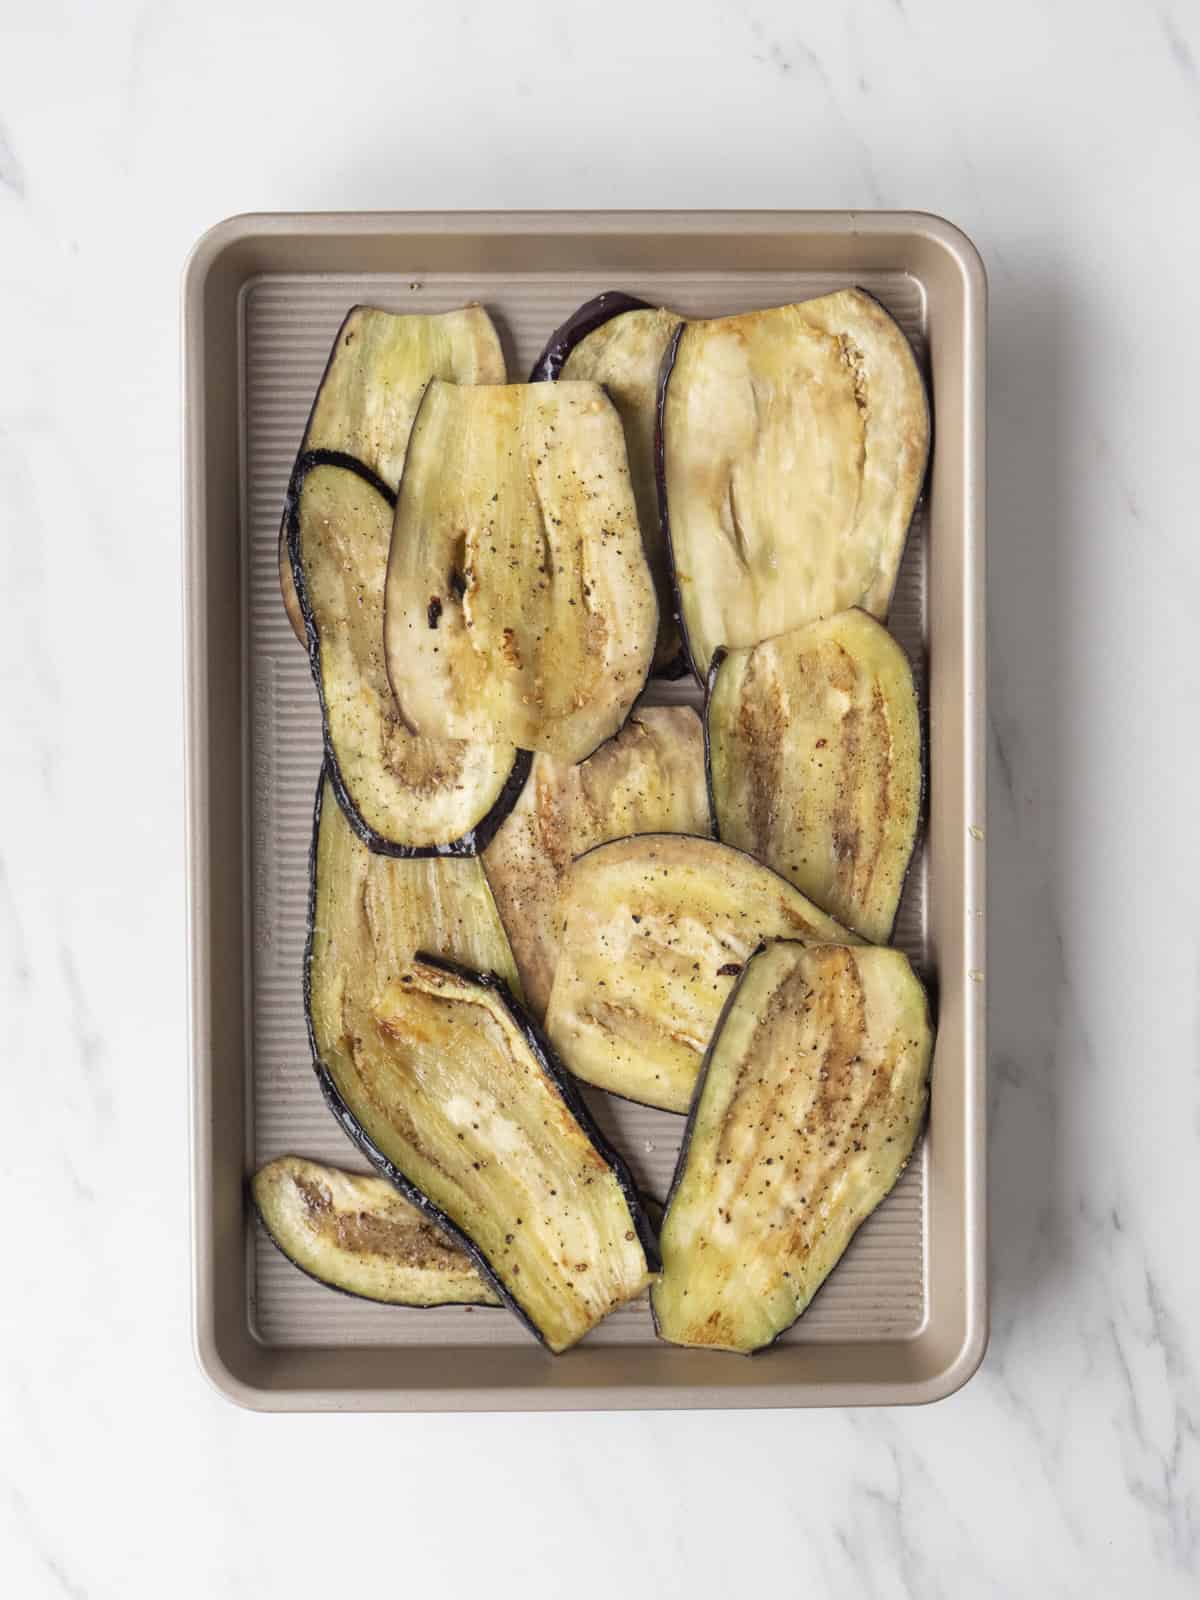 A baking sheet with lengthwise cut cooked slices of eggplant.